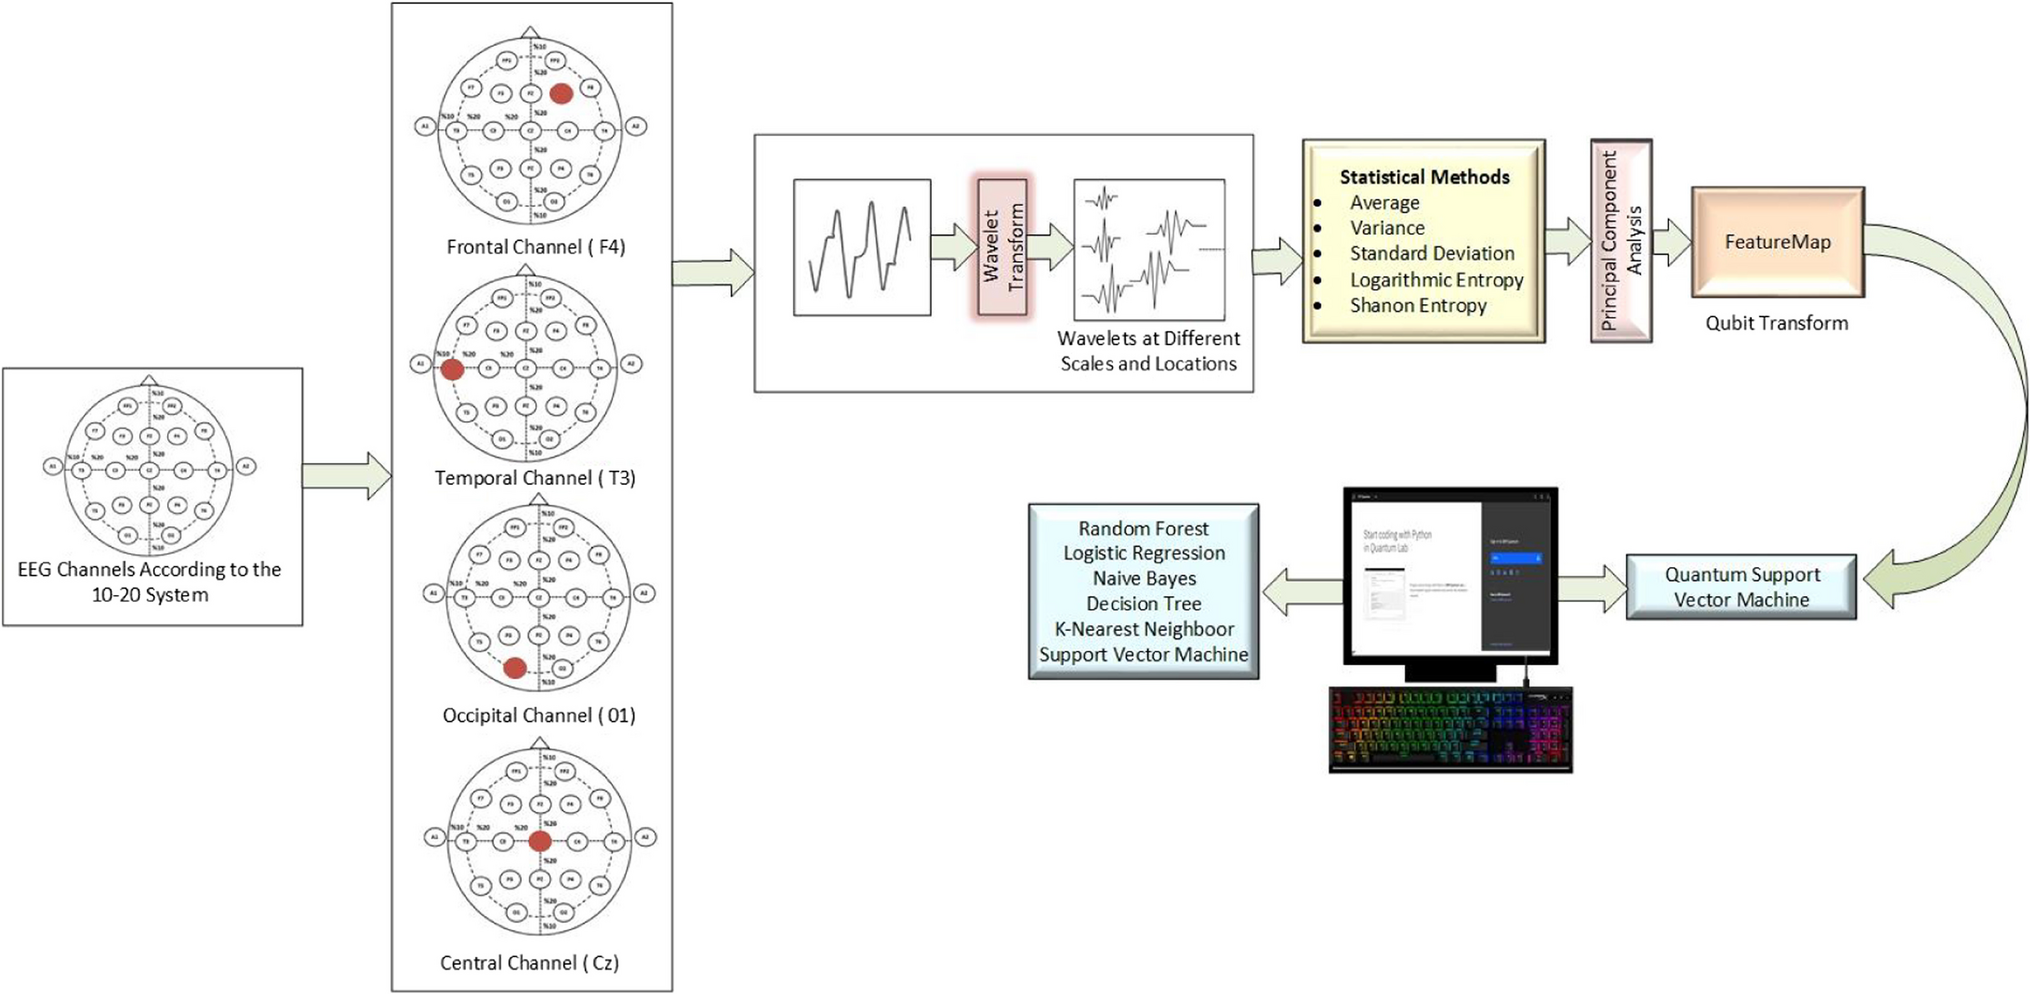 Quantum Machine-Based Decision Support System for the Detection of Schizophrenia from EEG Records